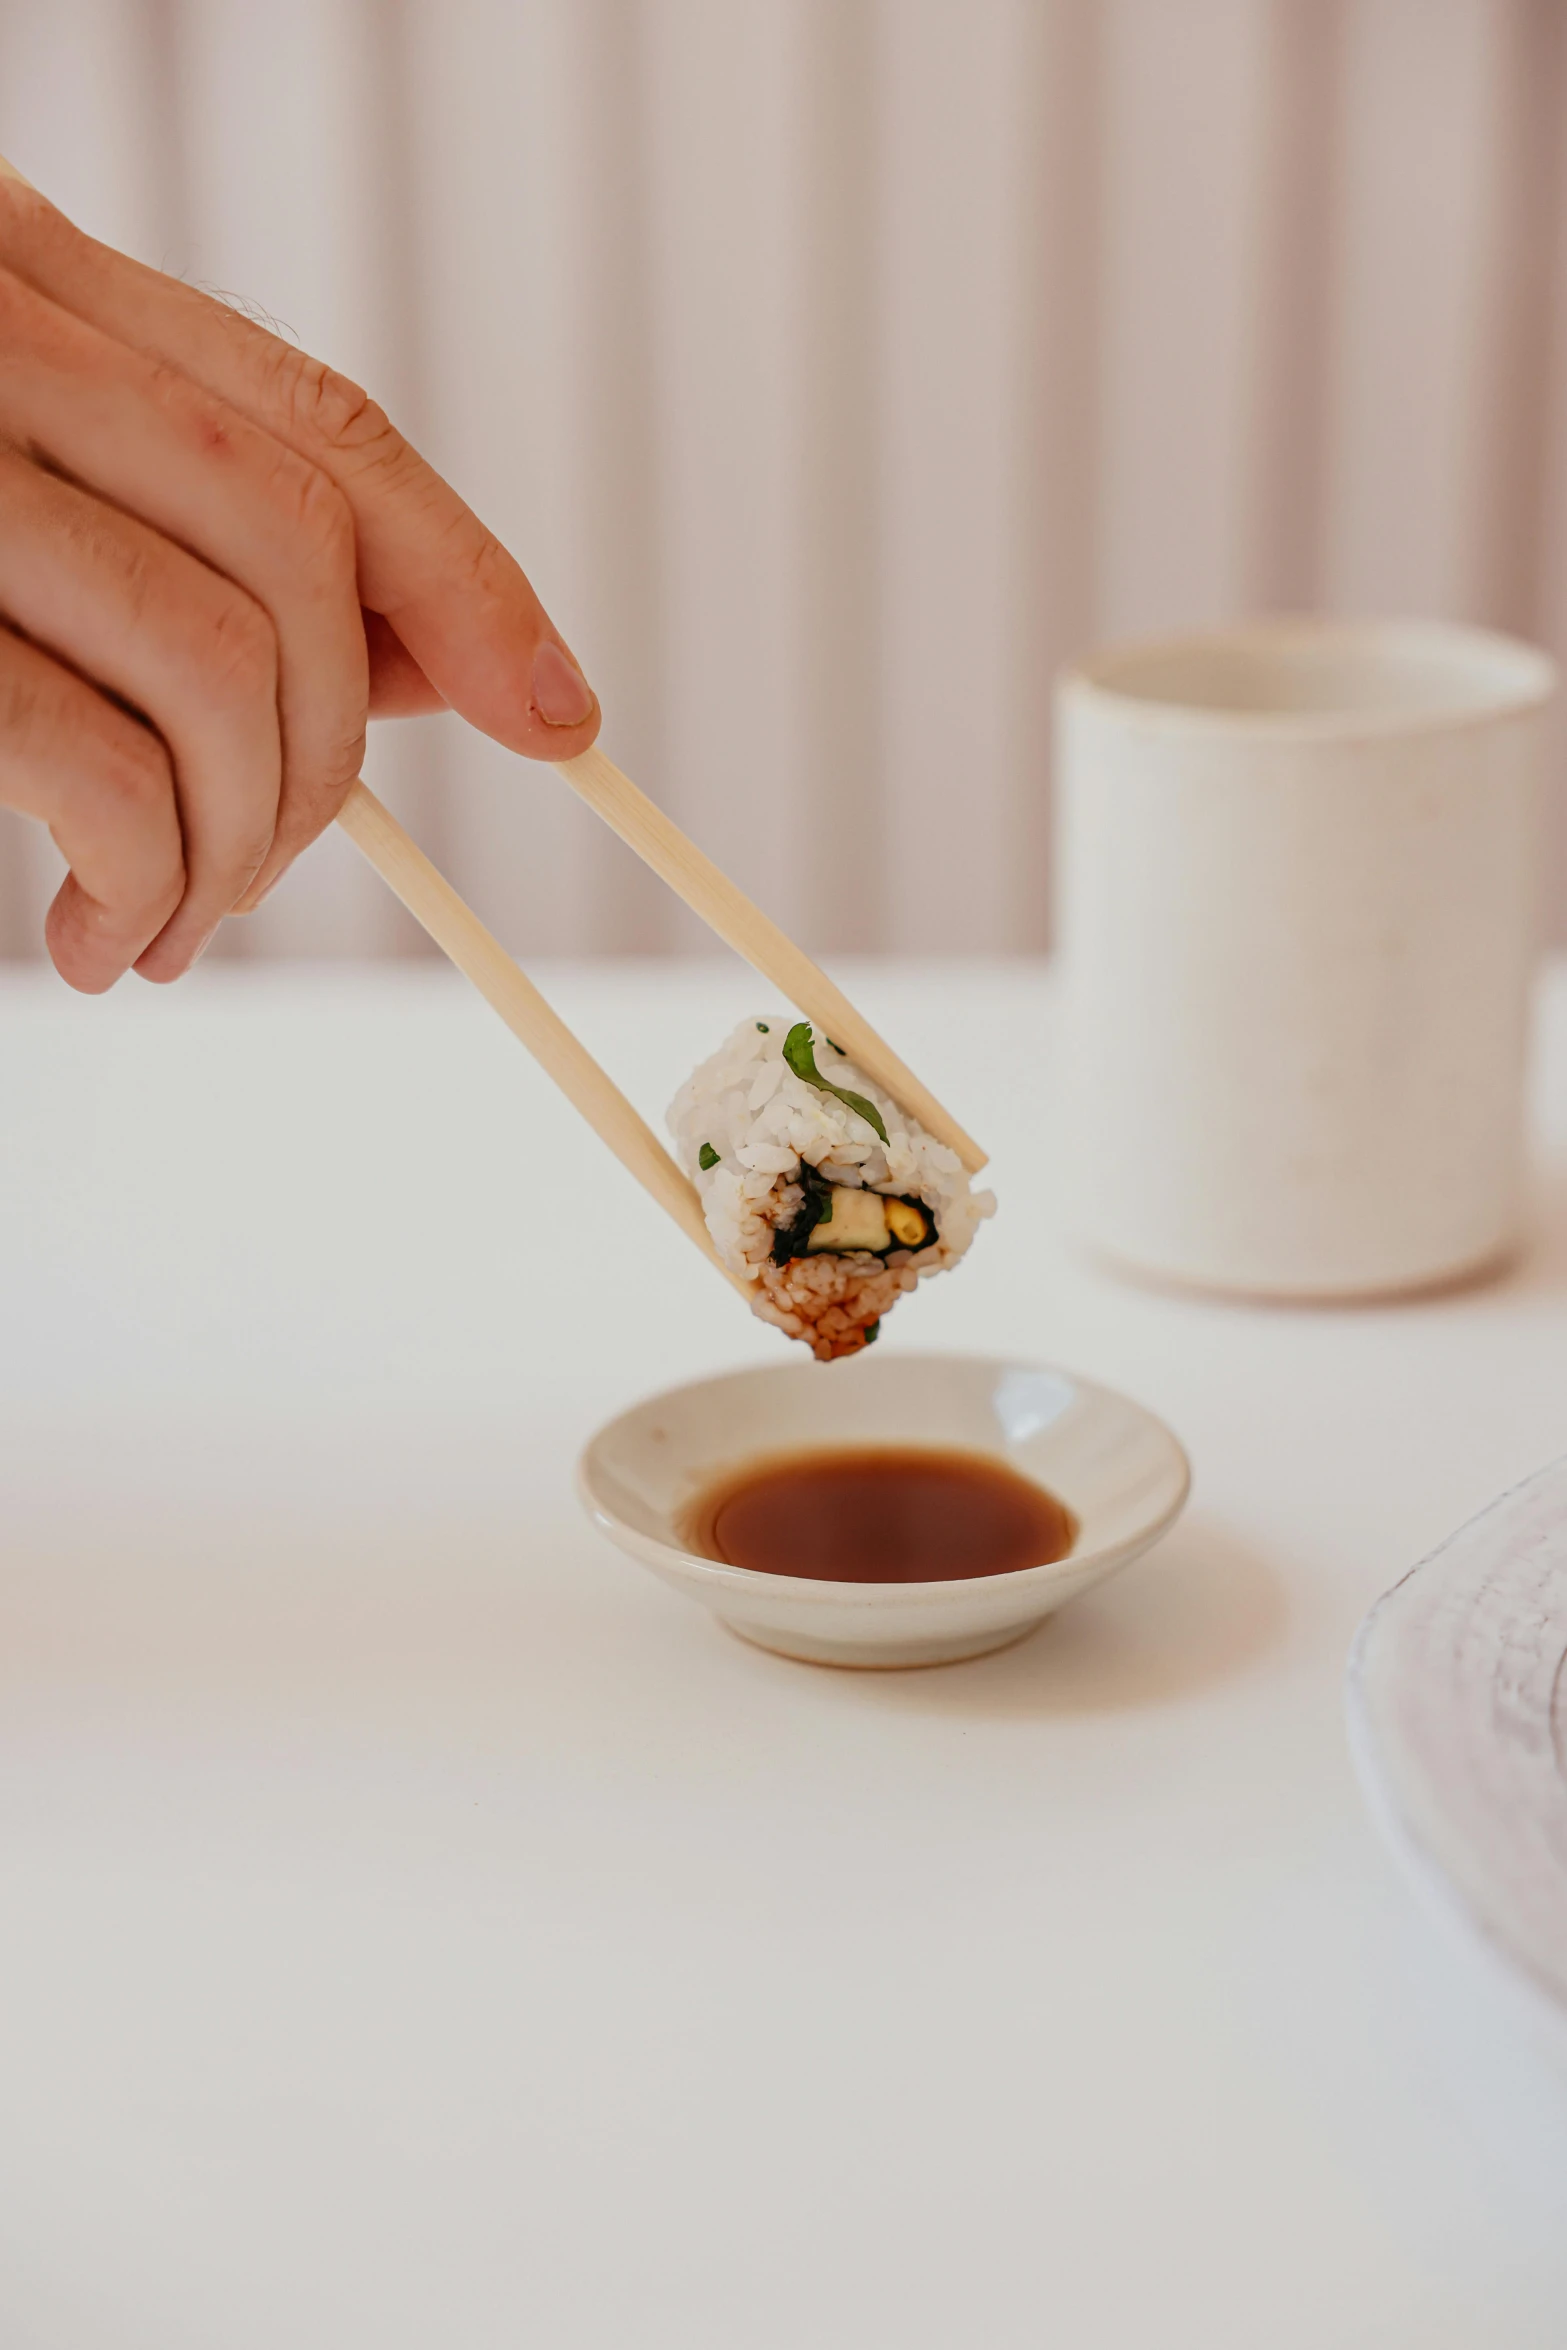 a person holding chopsticks over a plate of food, detailed product image, ginko showing a new mushi, melbourne, on a white table